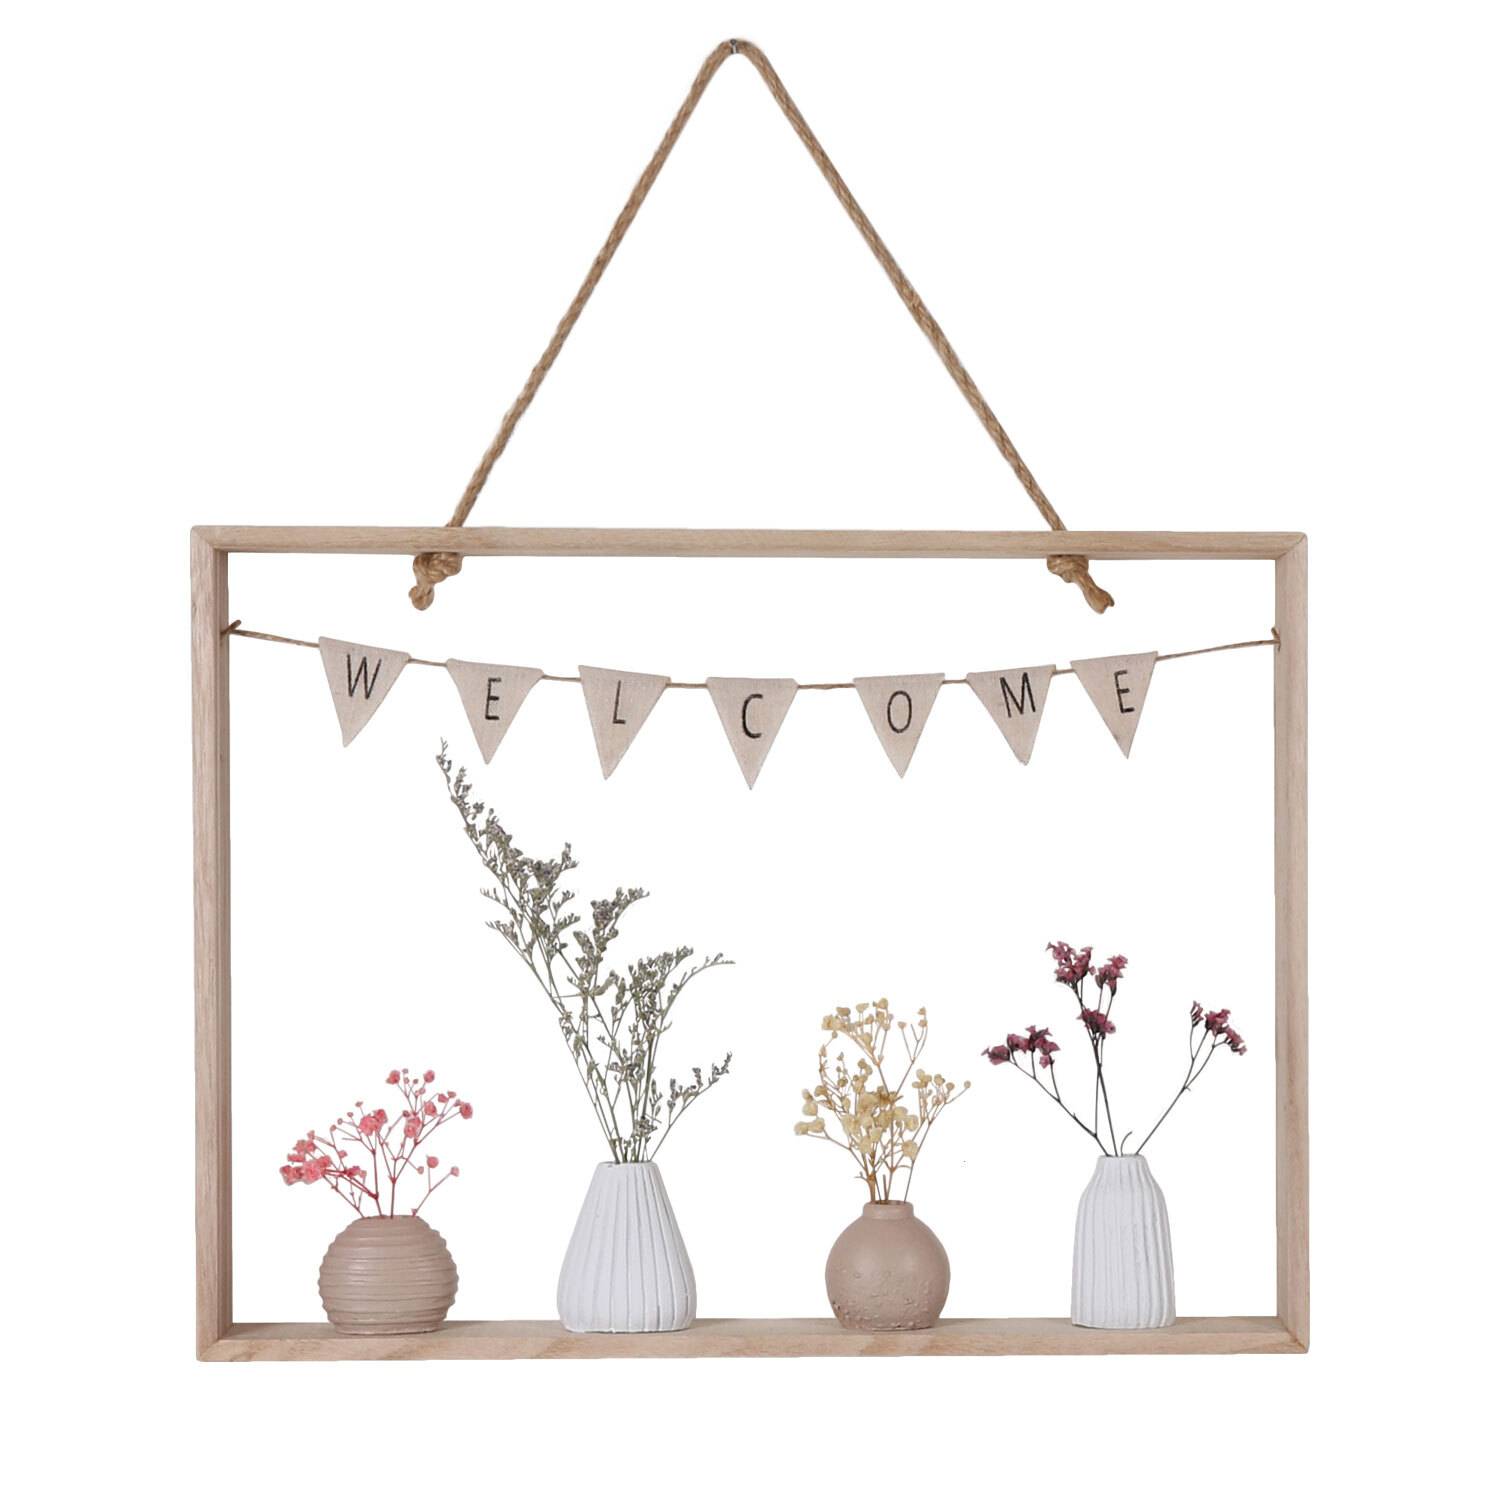 Welcome Floral Wall Hanging Art 30 x 40cm Image